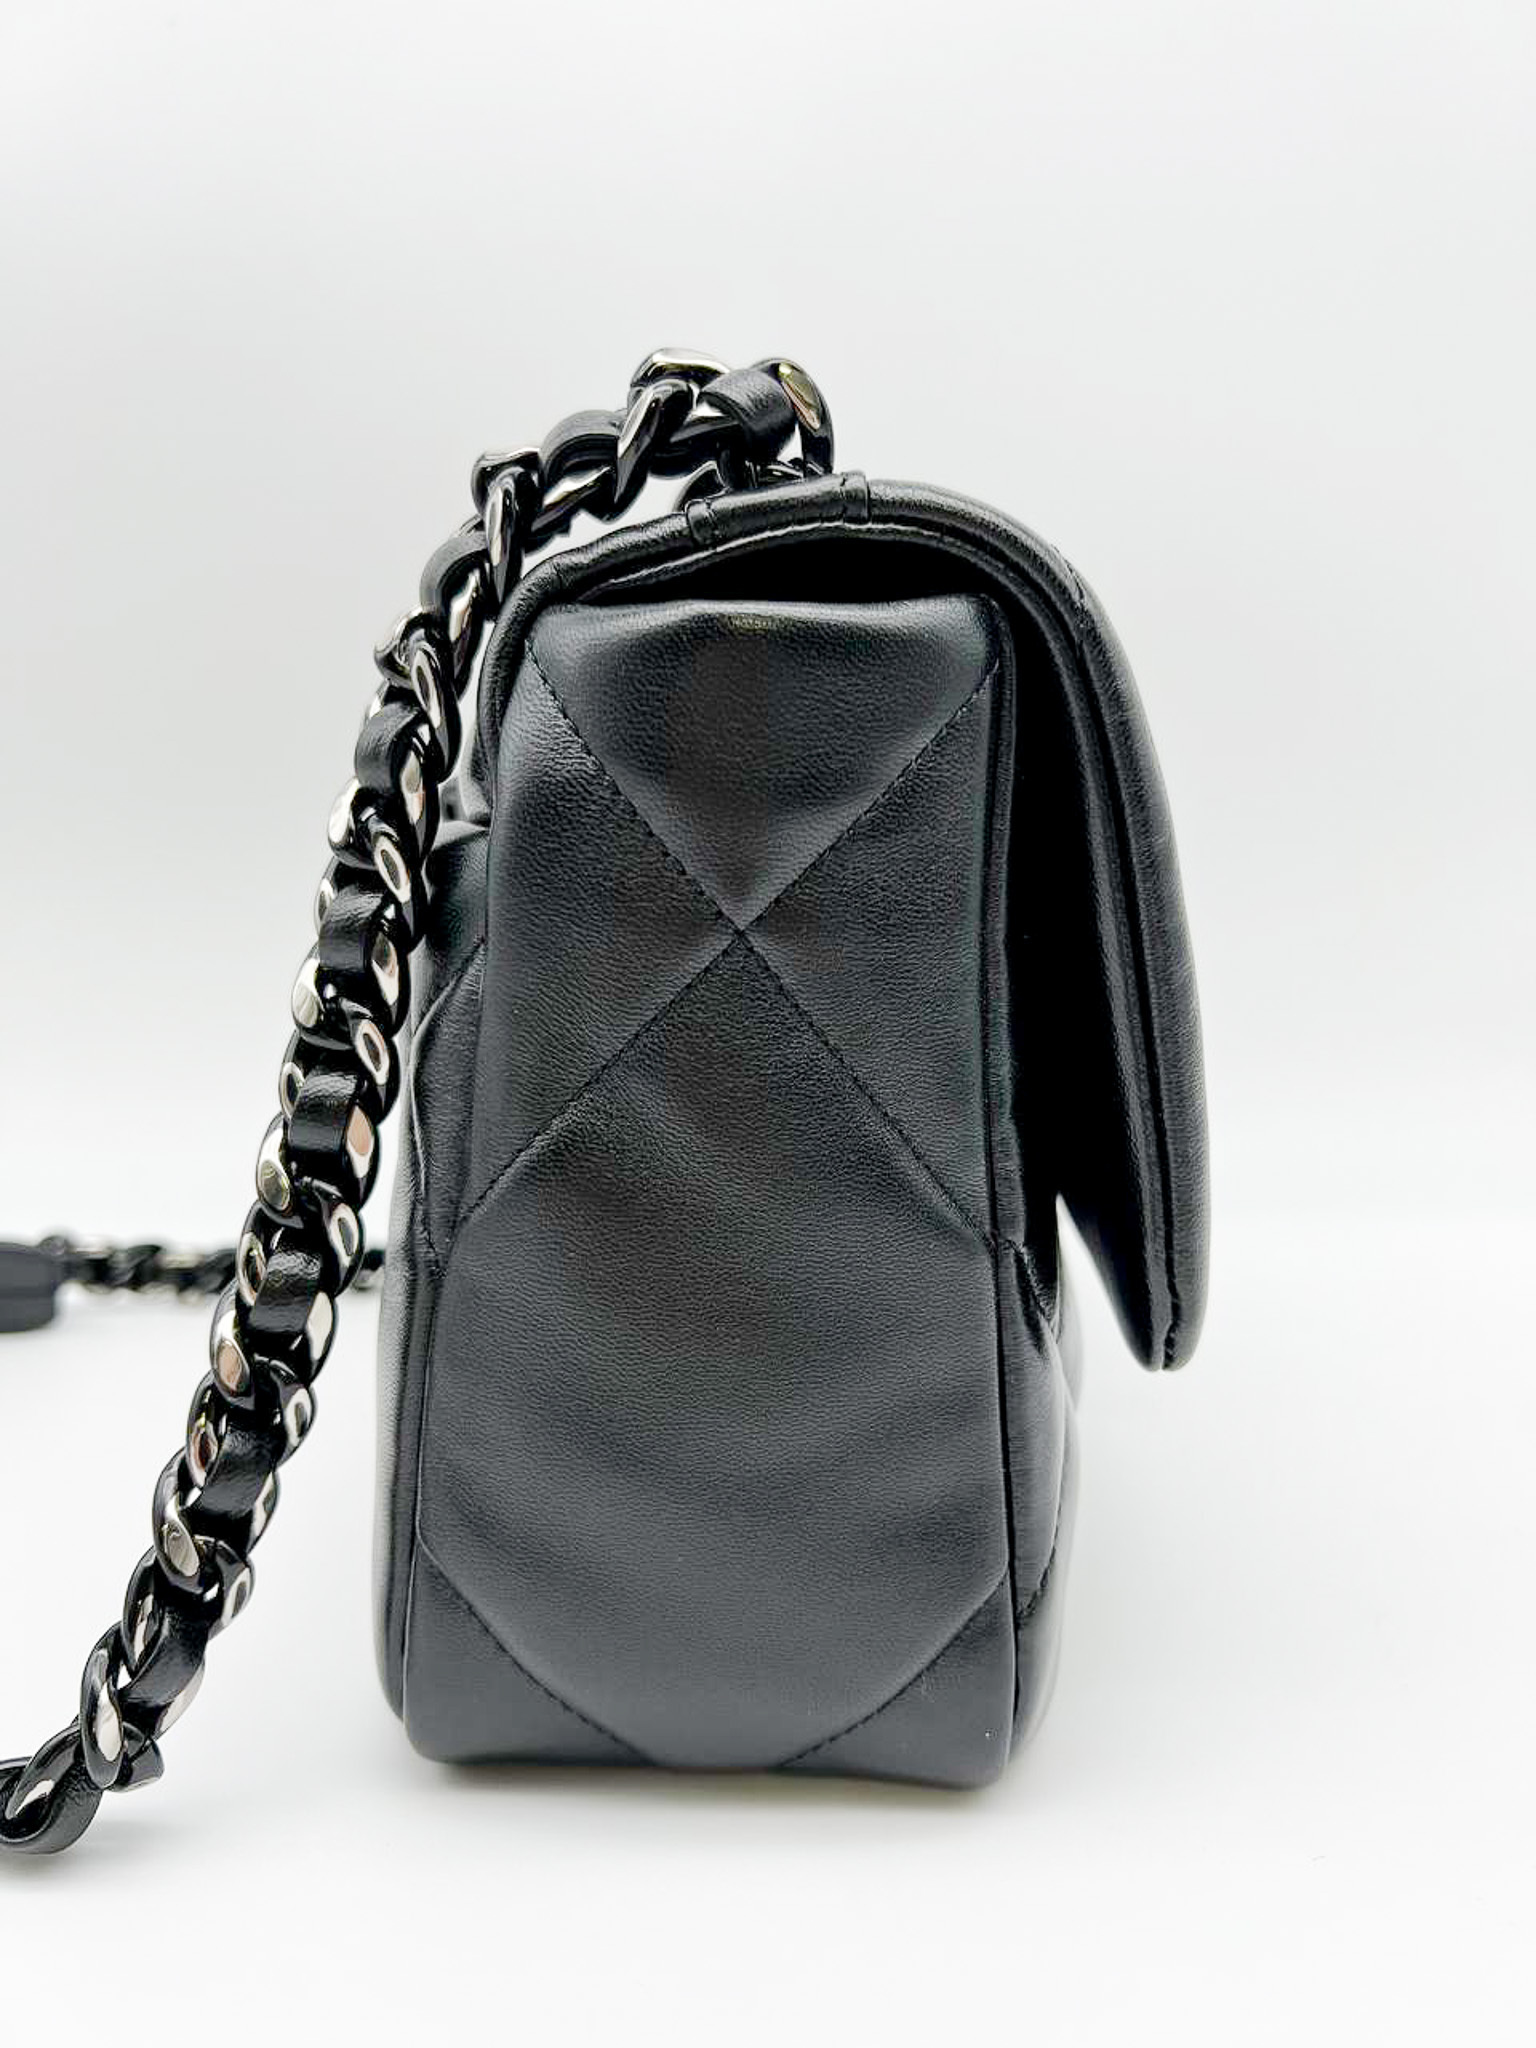 Chanel 19 Large Black, New in Dustbag